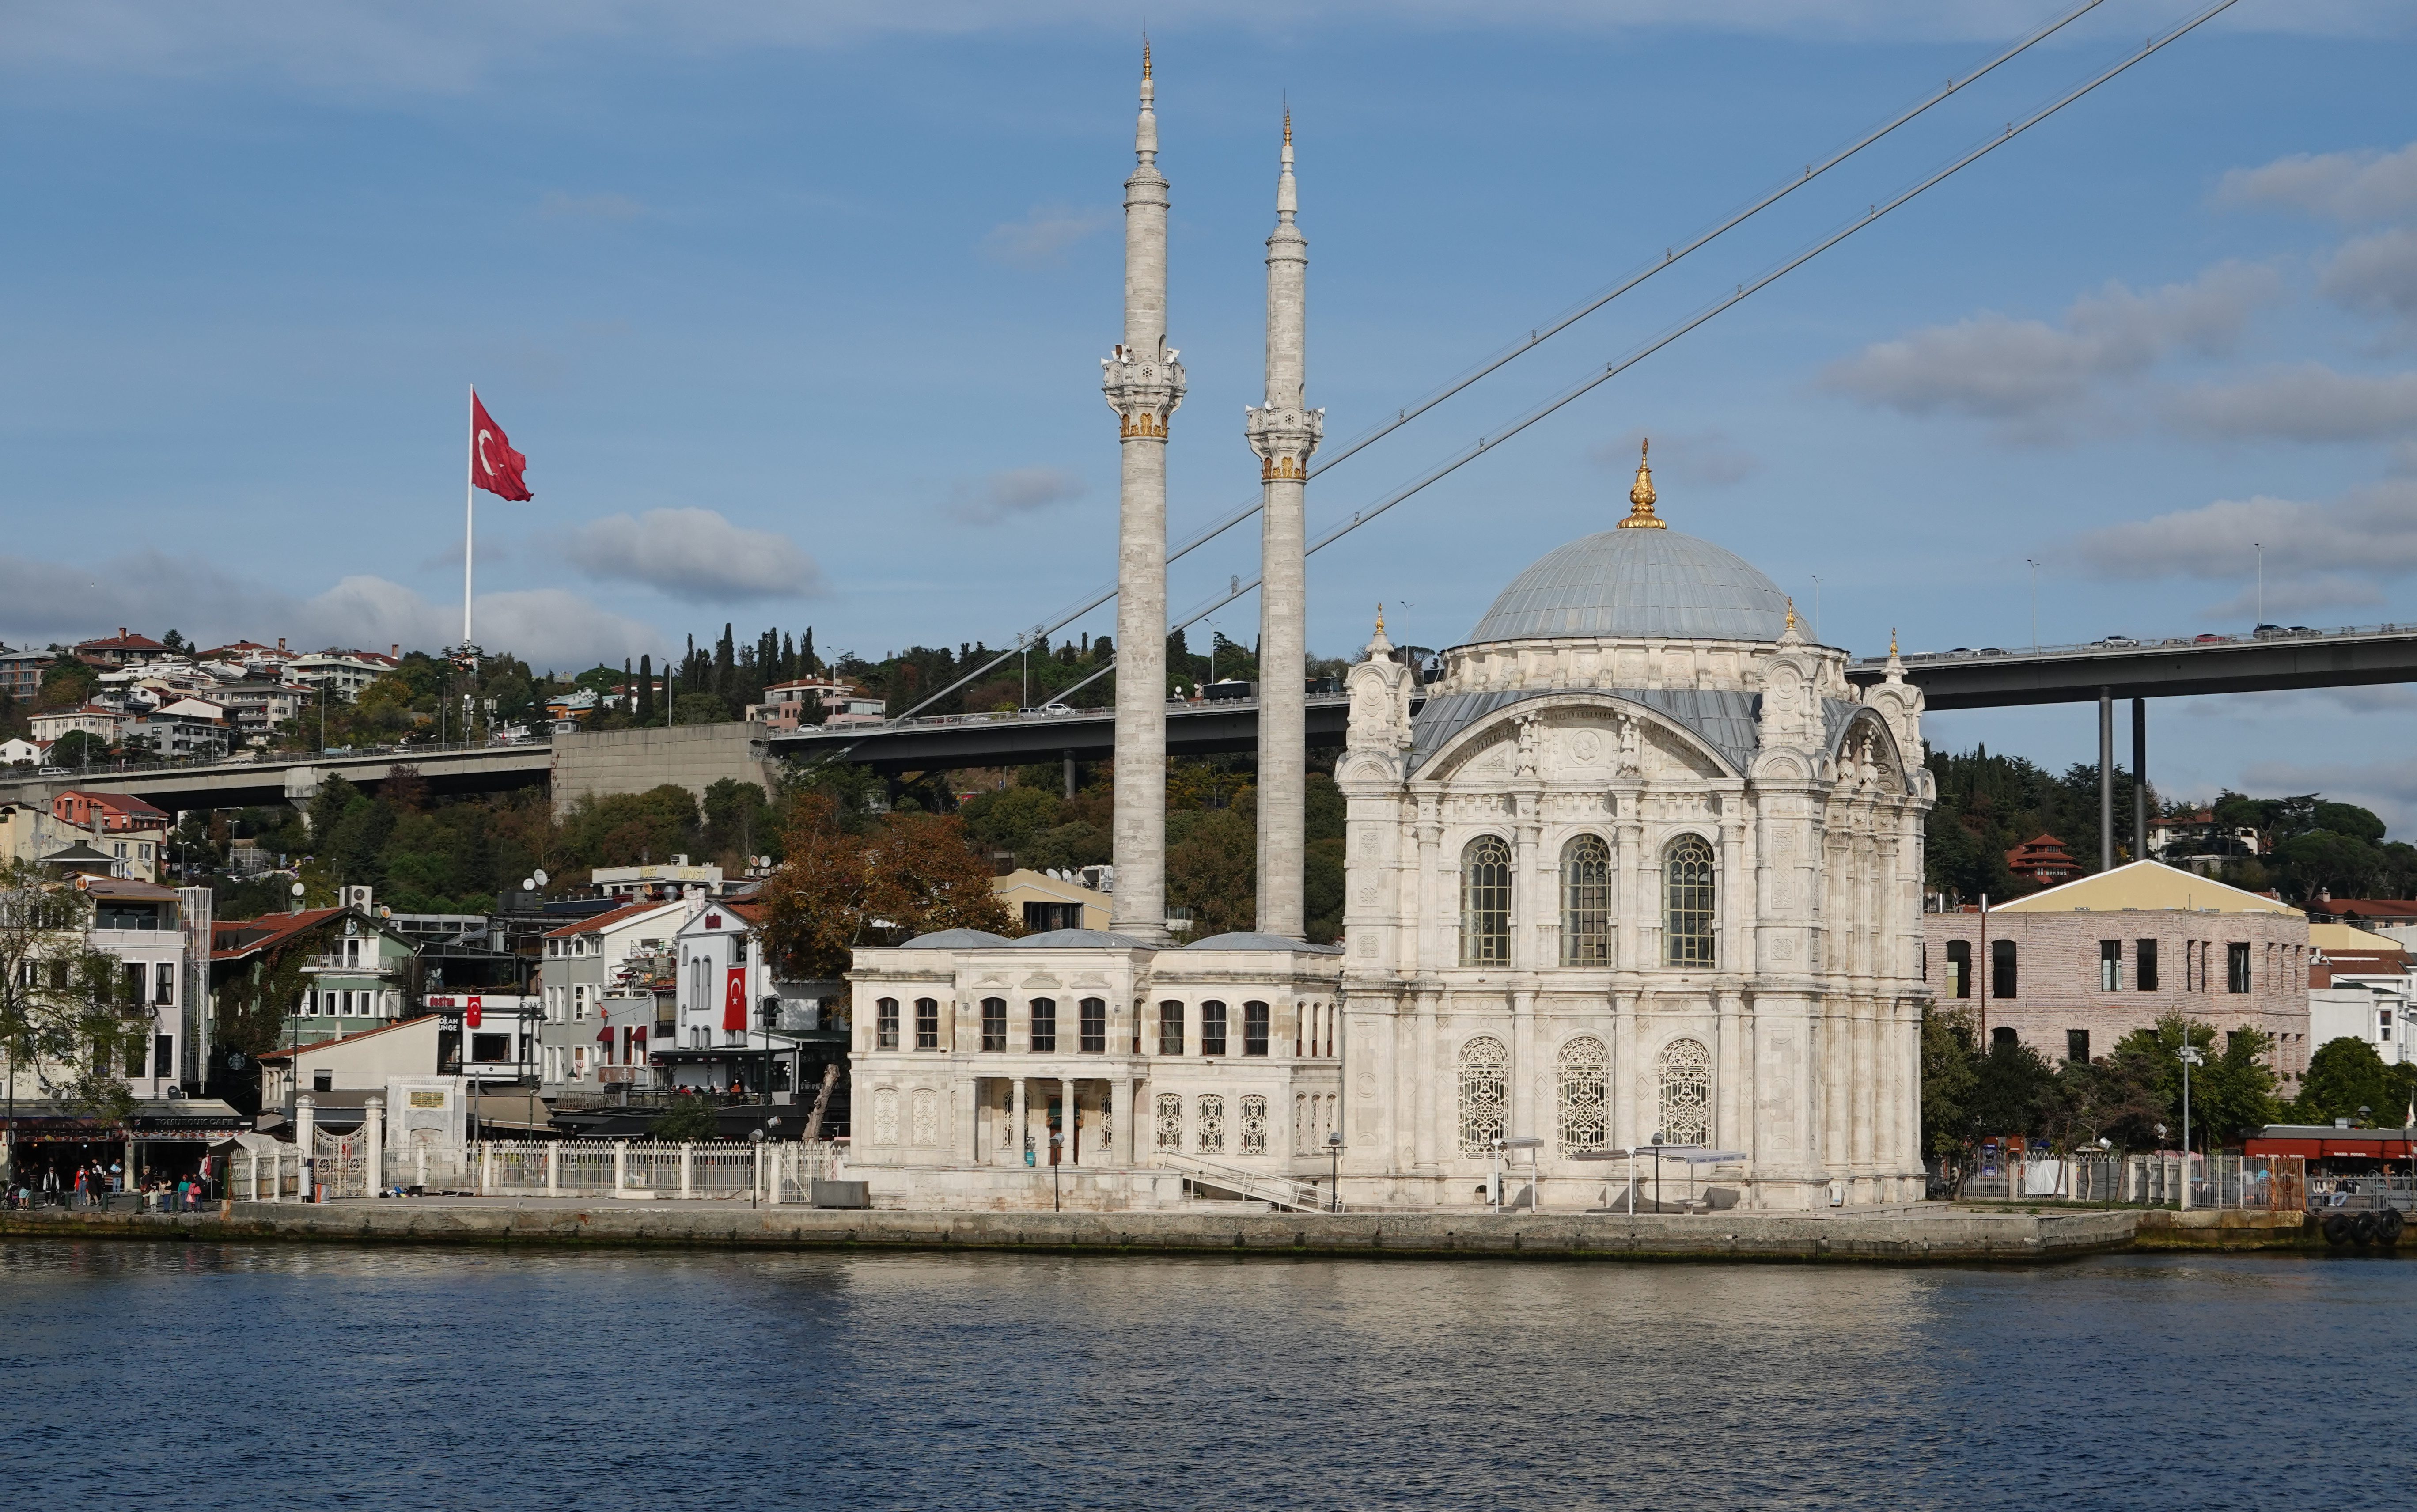 Orkakoy Mosque viewed from the Bosphorus Strait, Istanbul, Turkey